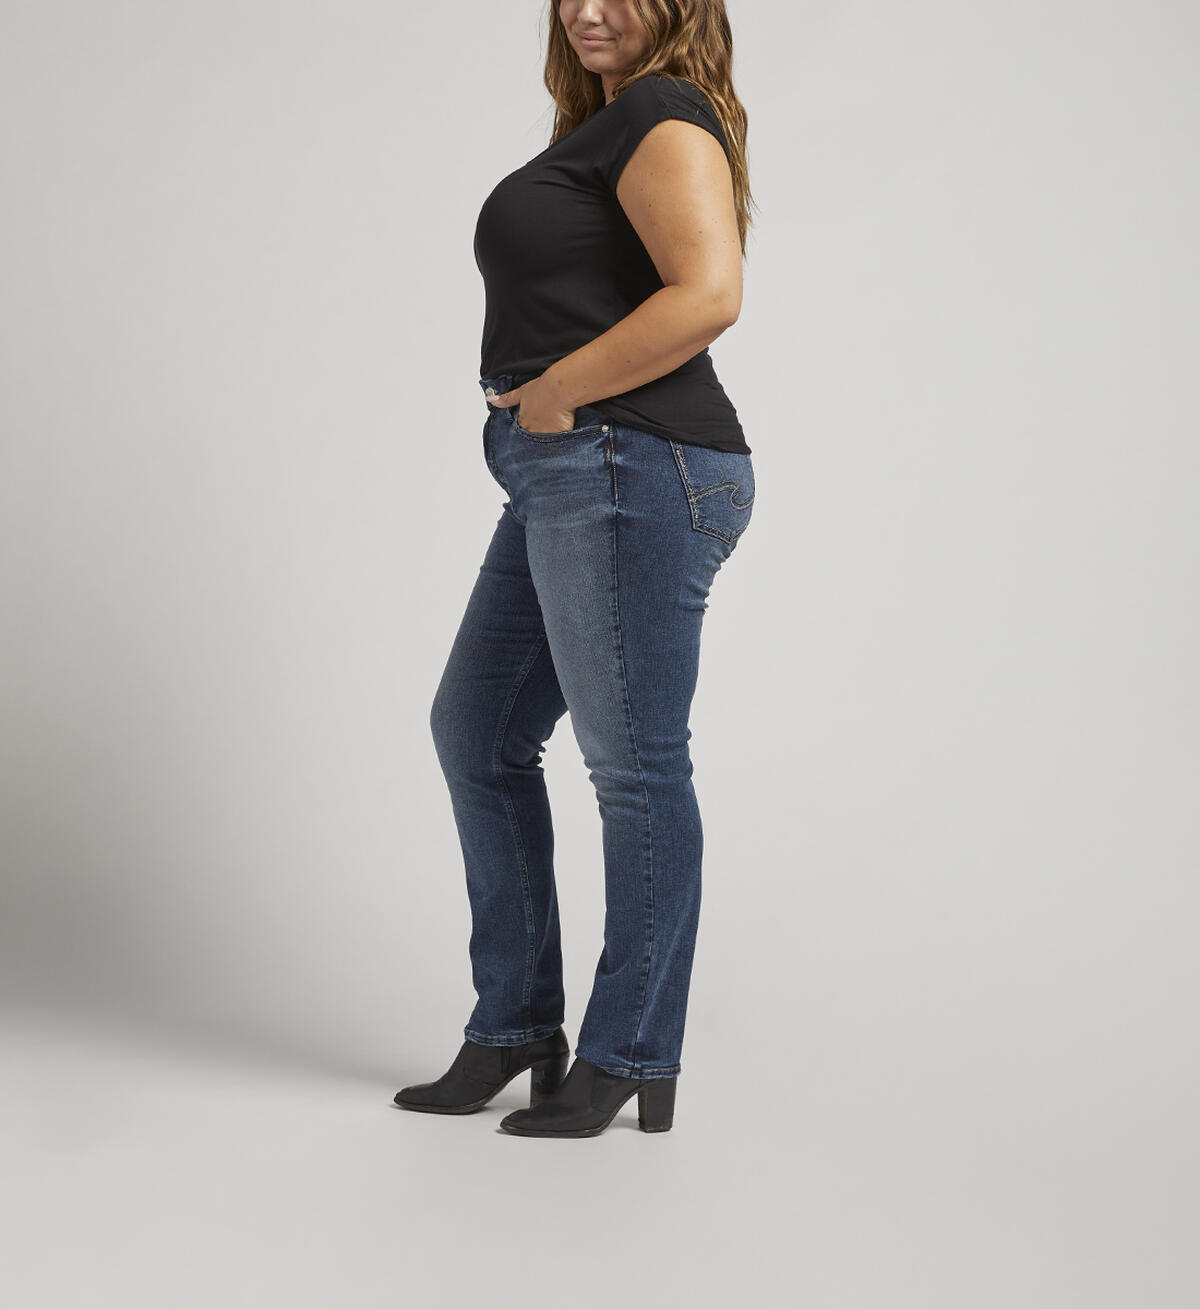 Avery High Rise Straight Leg Jeans Plus Size, , hi-res image number 2